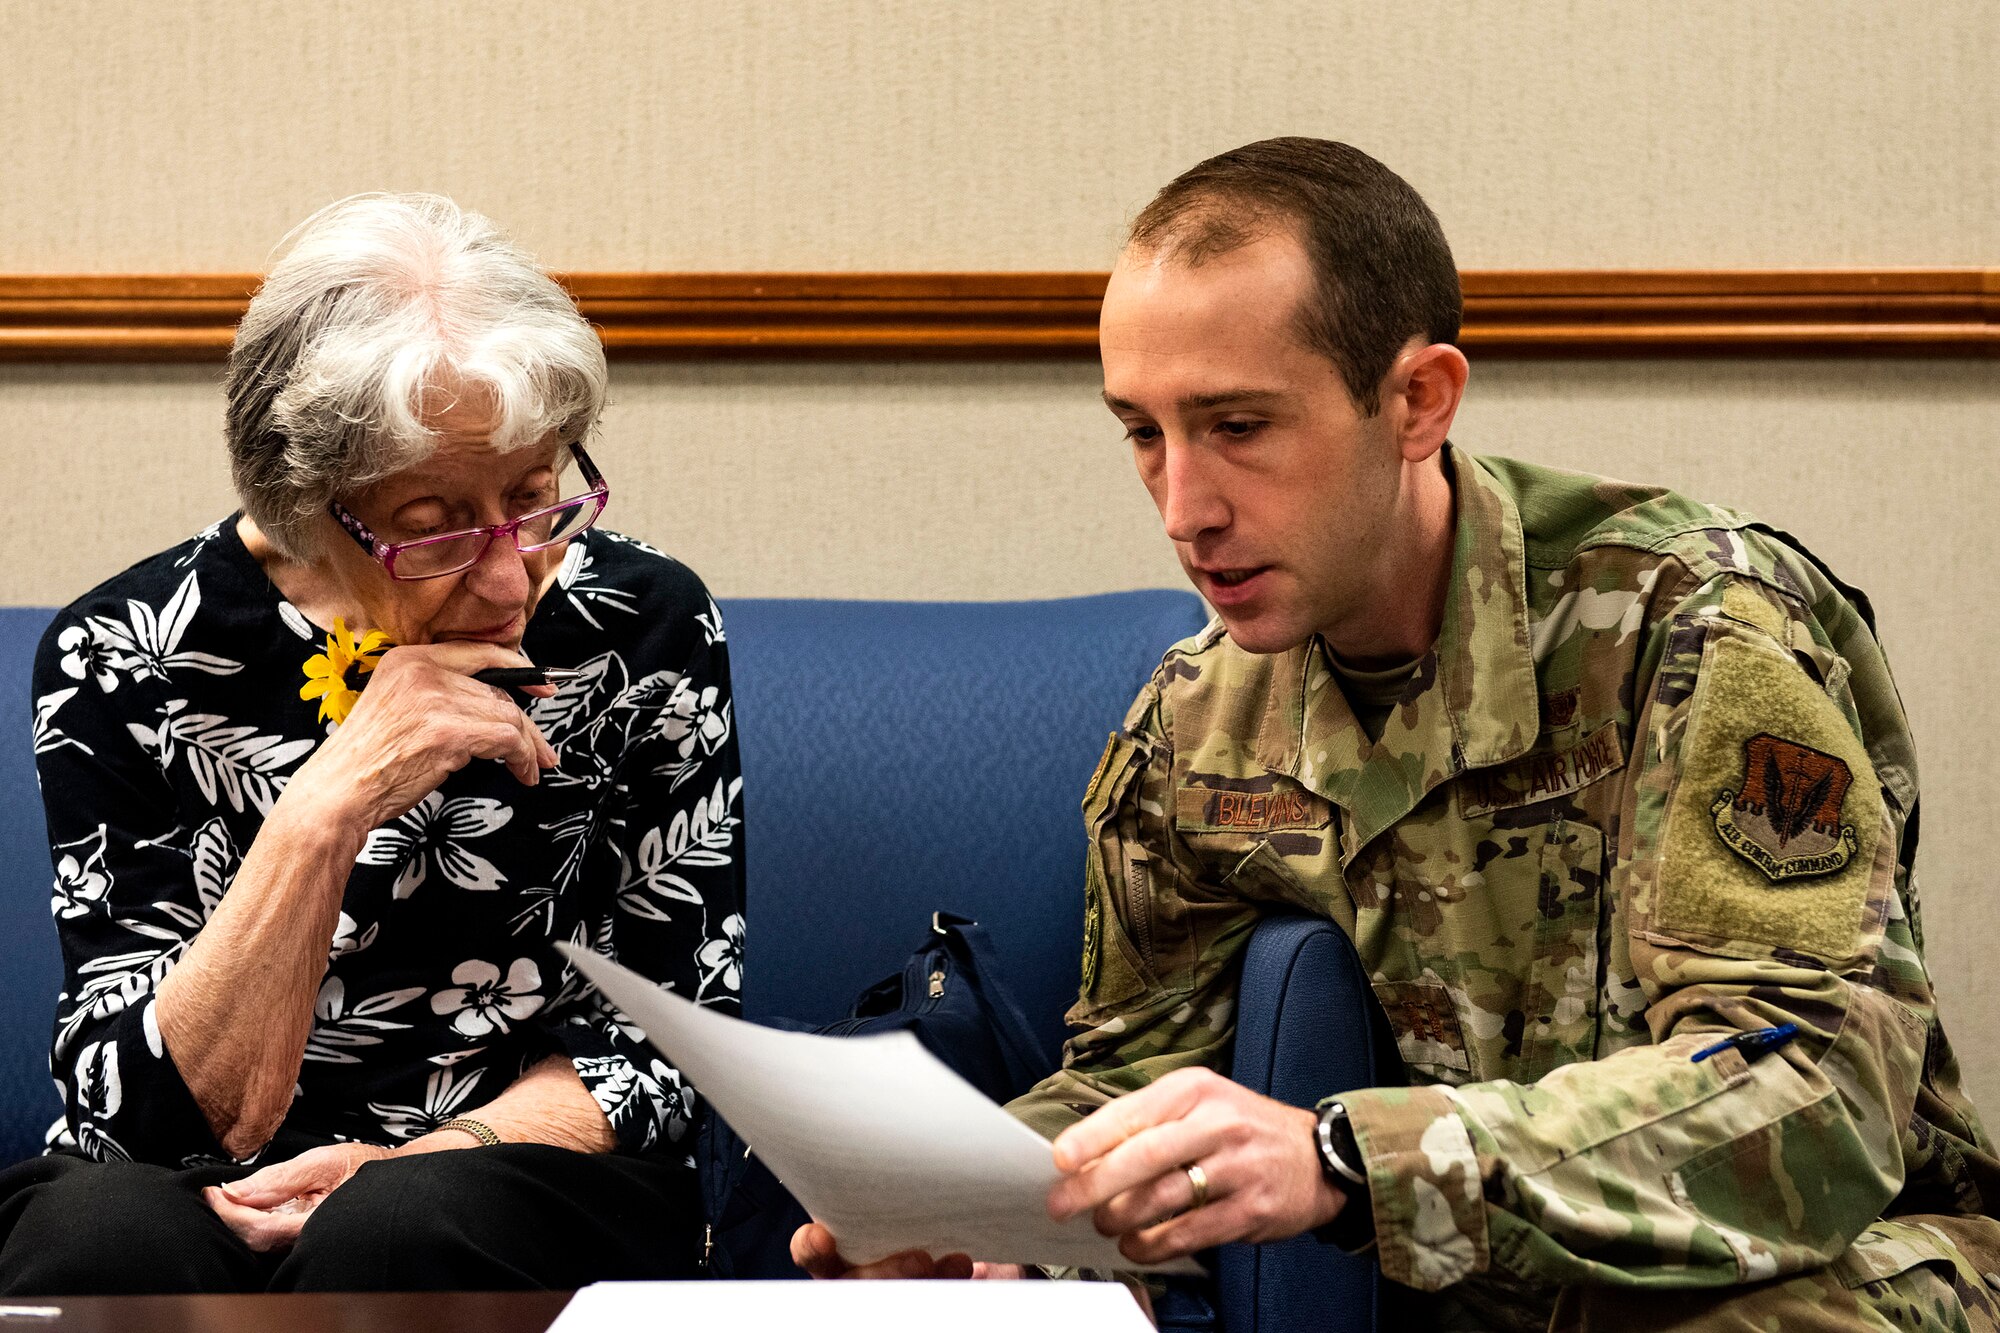 Capt. Phil Blevins, right, 23d Wing chief of general law, assists Barbara Swindell, retiree spouse, with her will Oct. 8, 2019, at Moody Air Force Base, Ga. The judge advocate office regularly aids retirees and military members with wills on Tuesdays. This free legal assistance provides personal and financial relief for customers and enables Airman readiness. (U.S. Air Force photo by Senior Airman Erick Requadt)